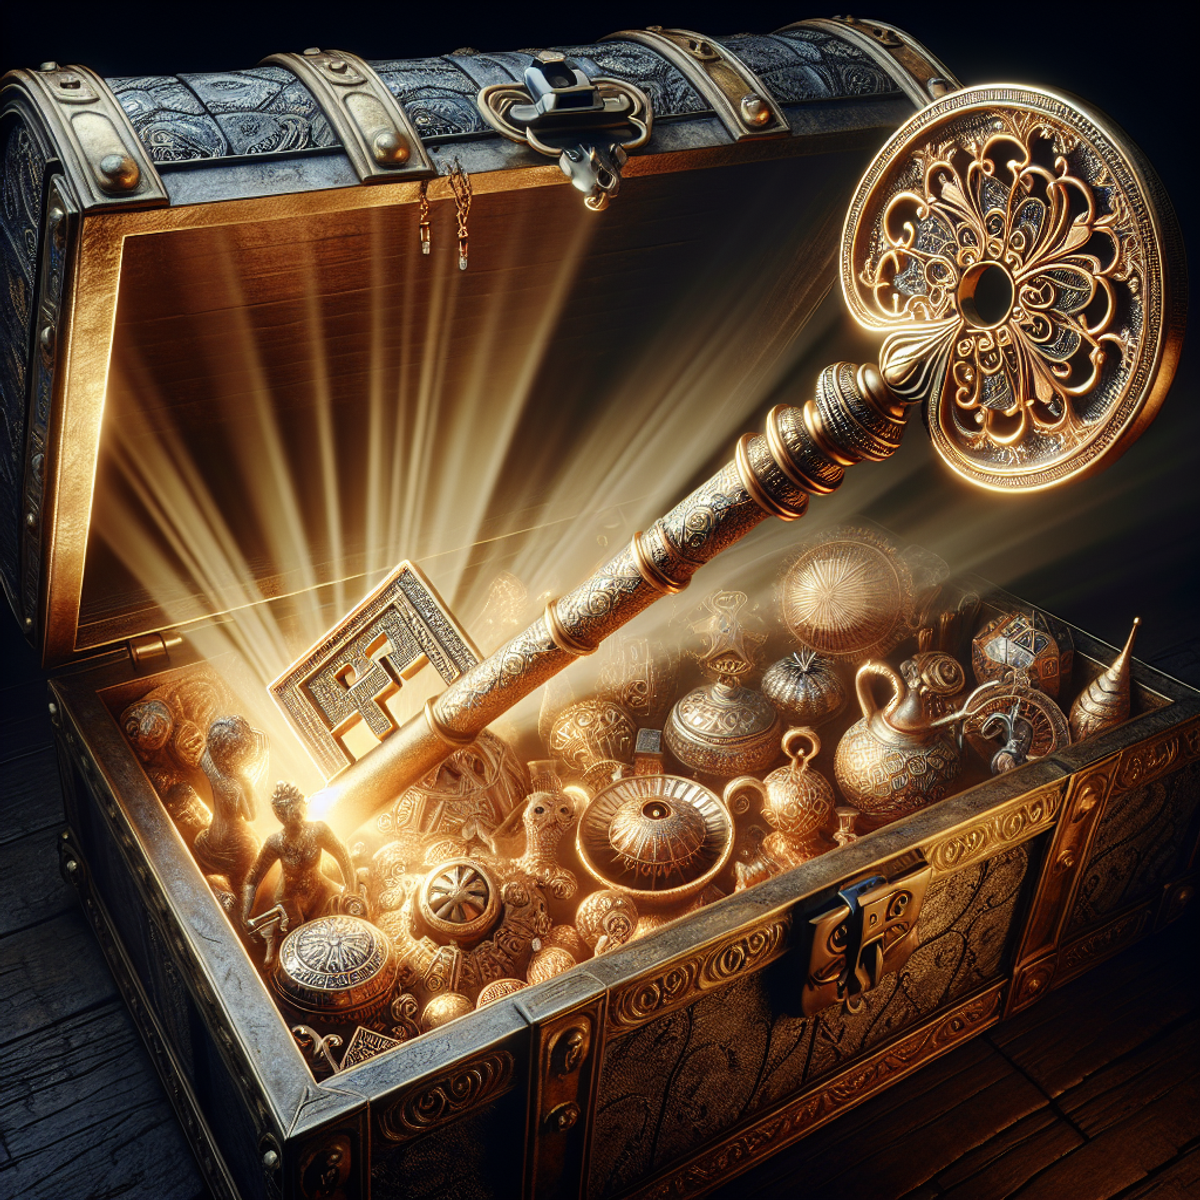 A large golden key unlocking an old, wooden treasure chest filled with valuable art pieces.